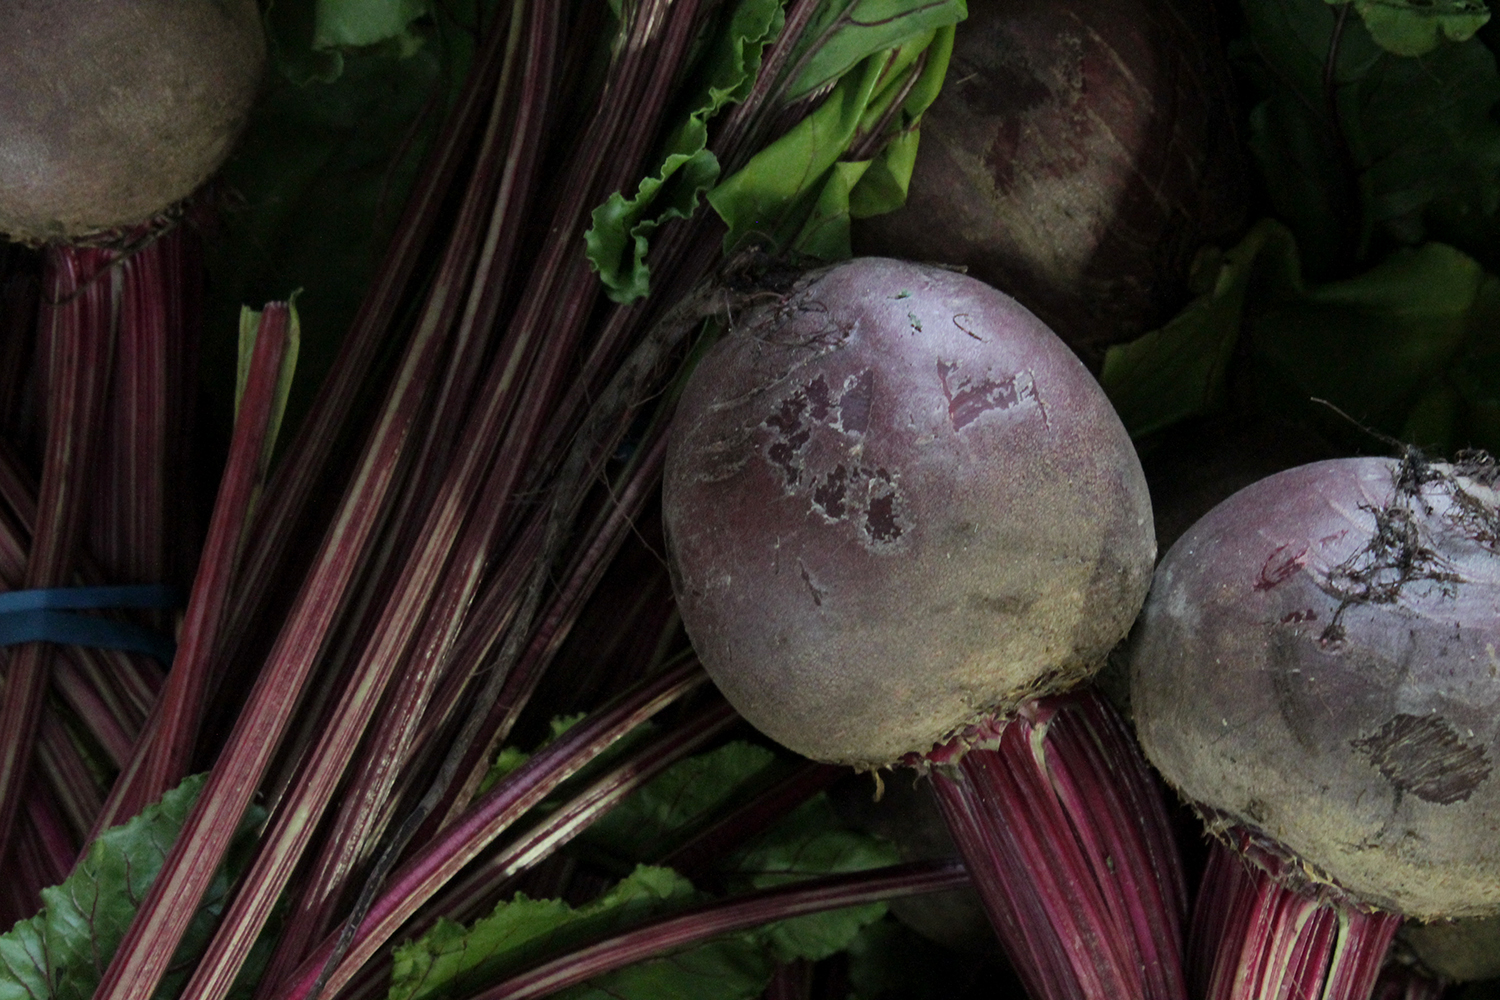 Beets sold at Robt. t. Cochran & Co.